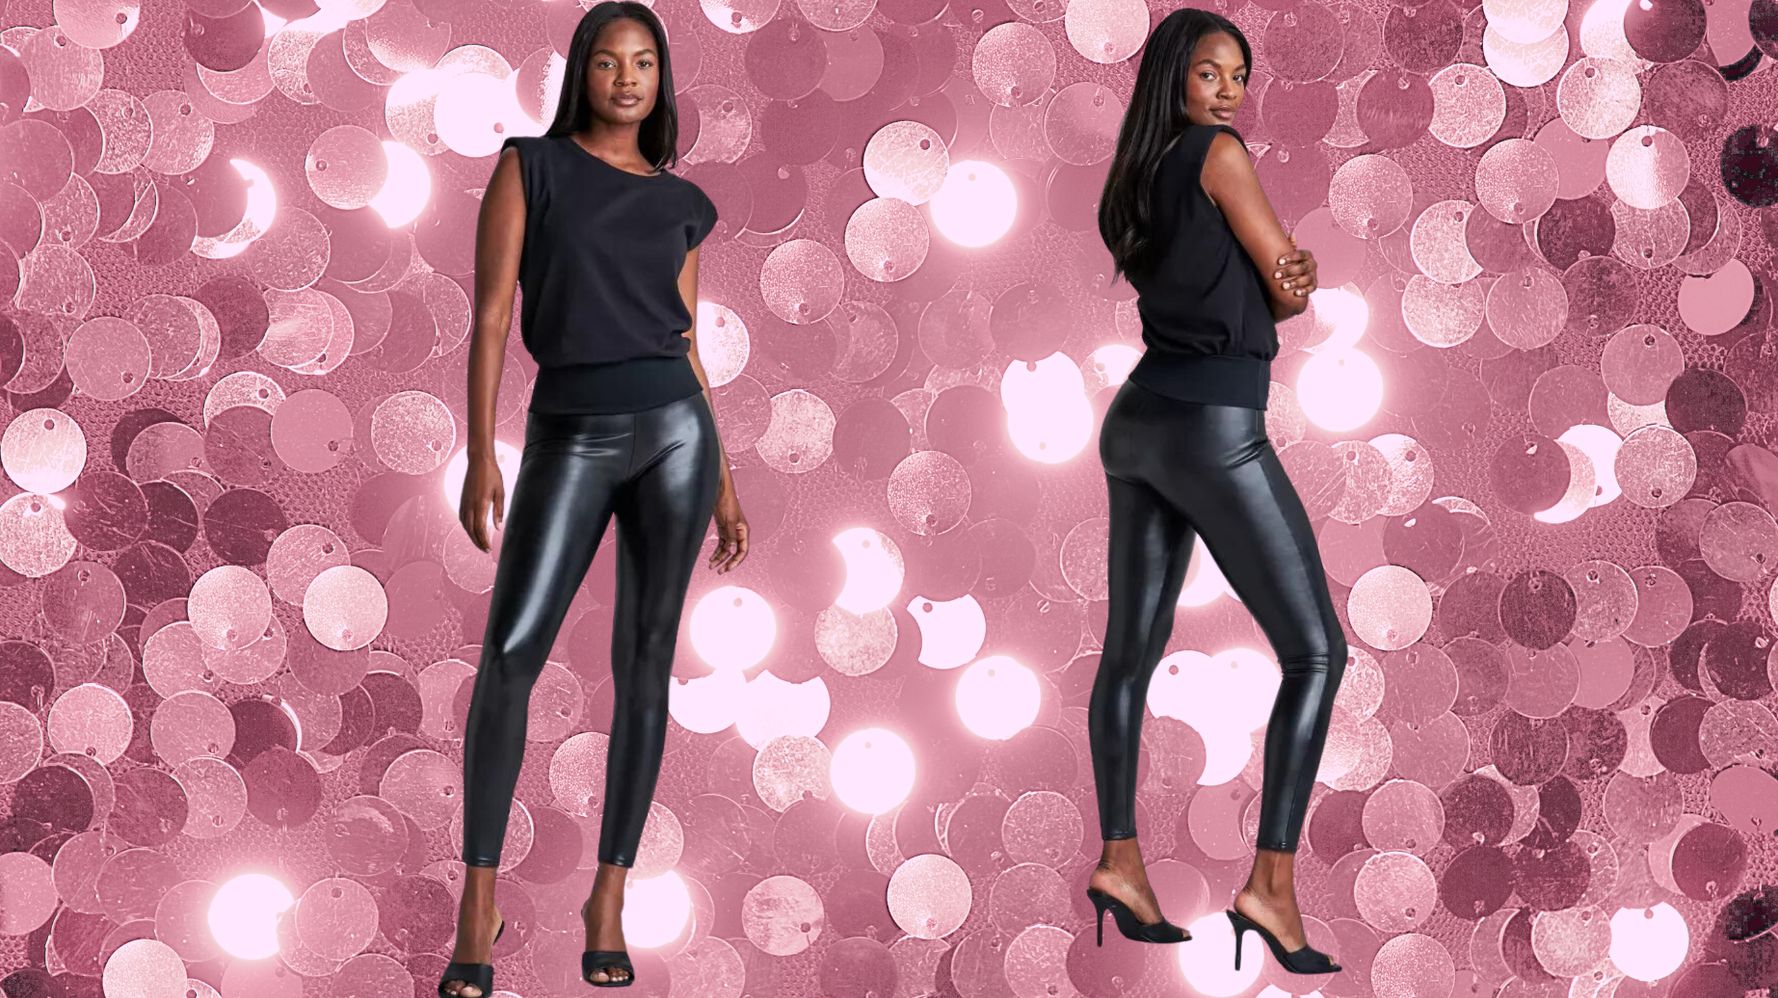 Spanx arm tights exist and we just have to ask: do we really need them?